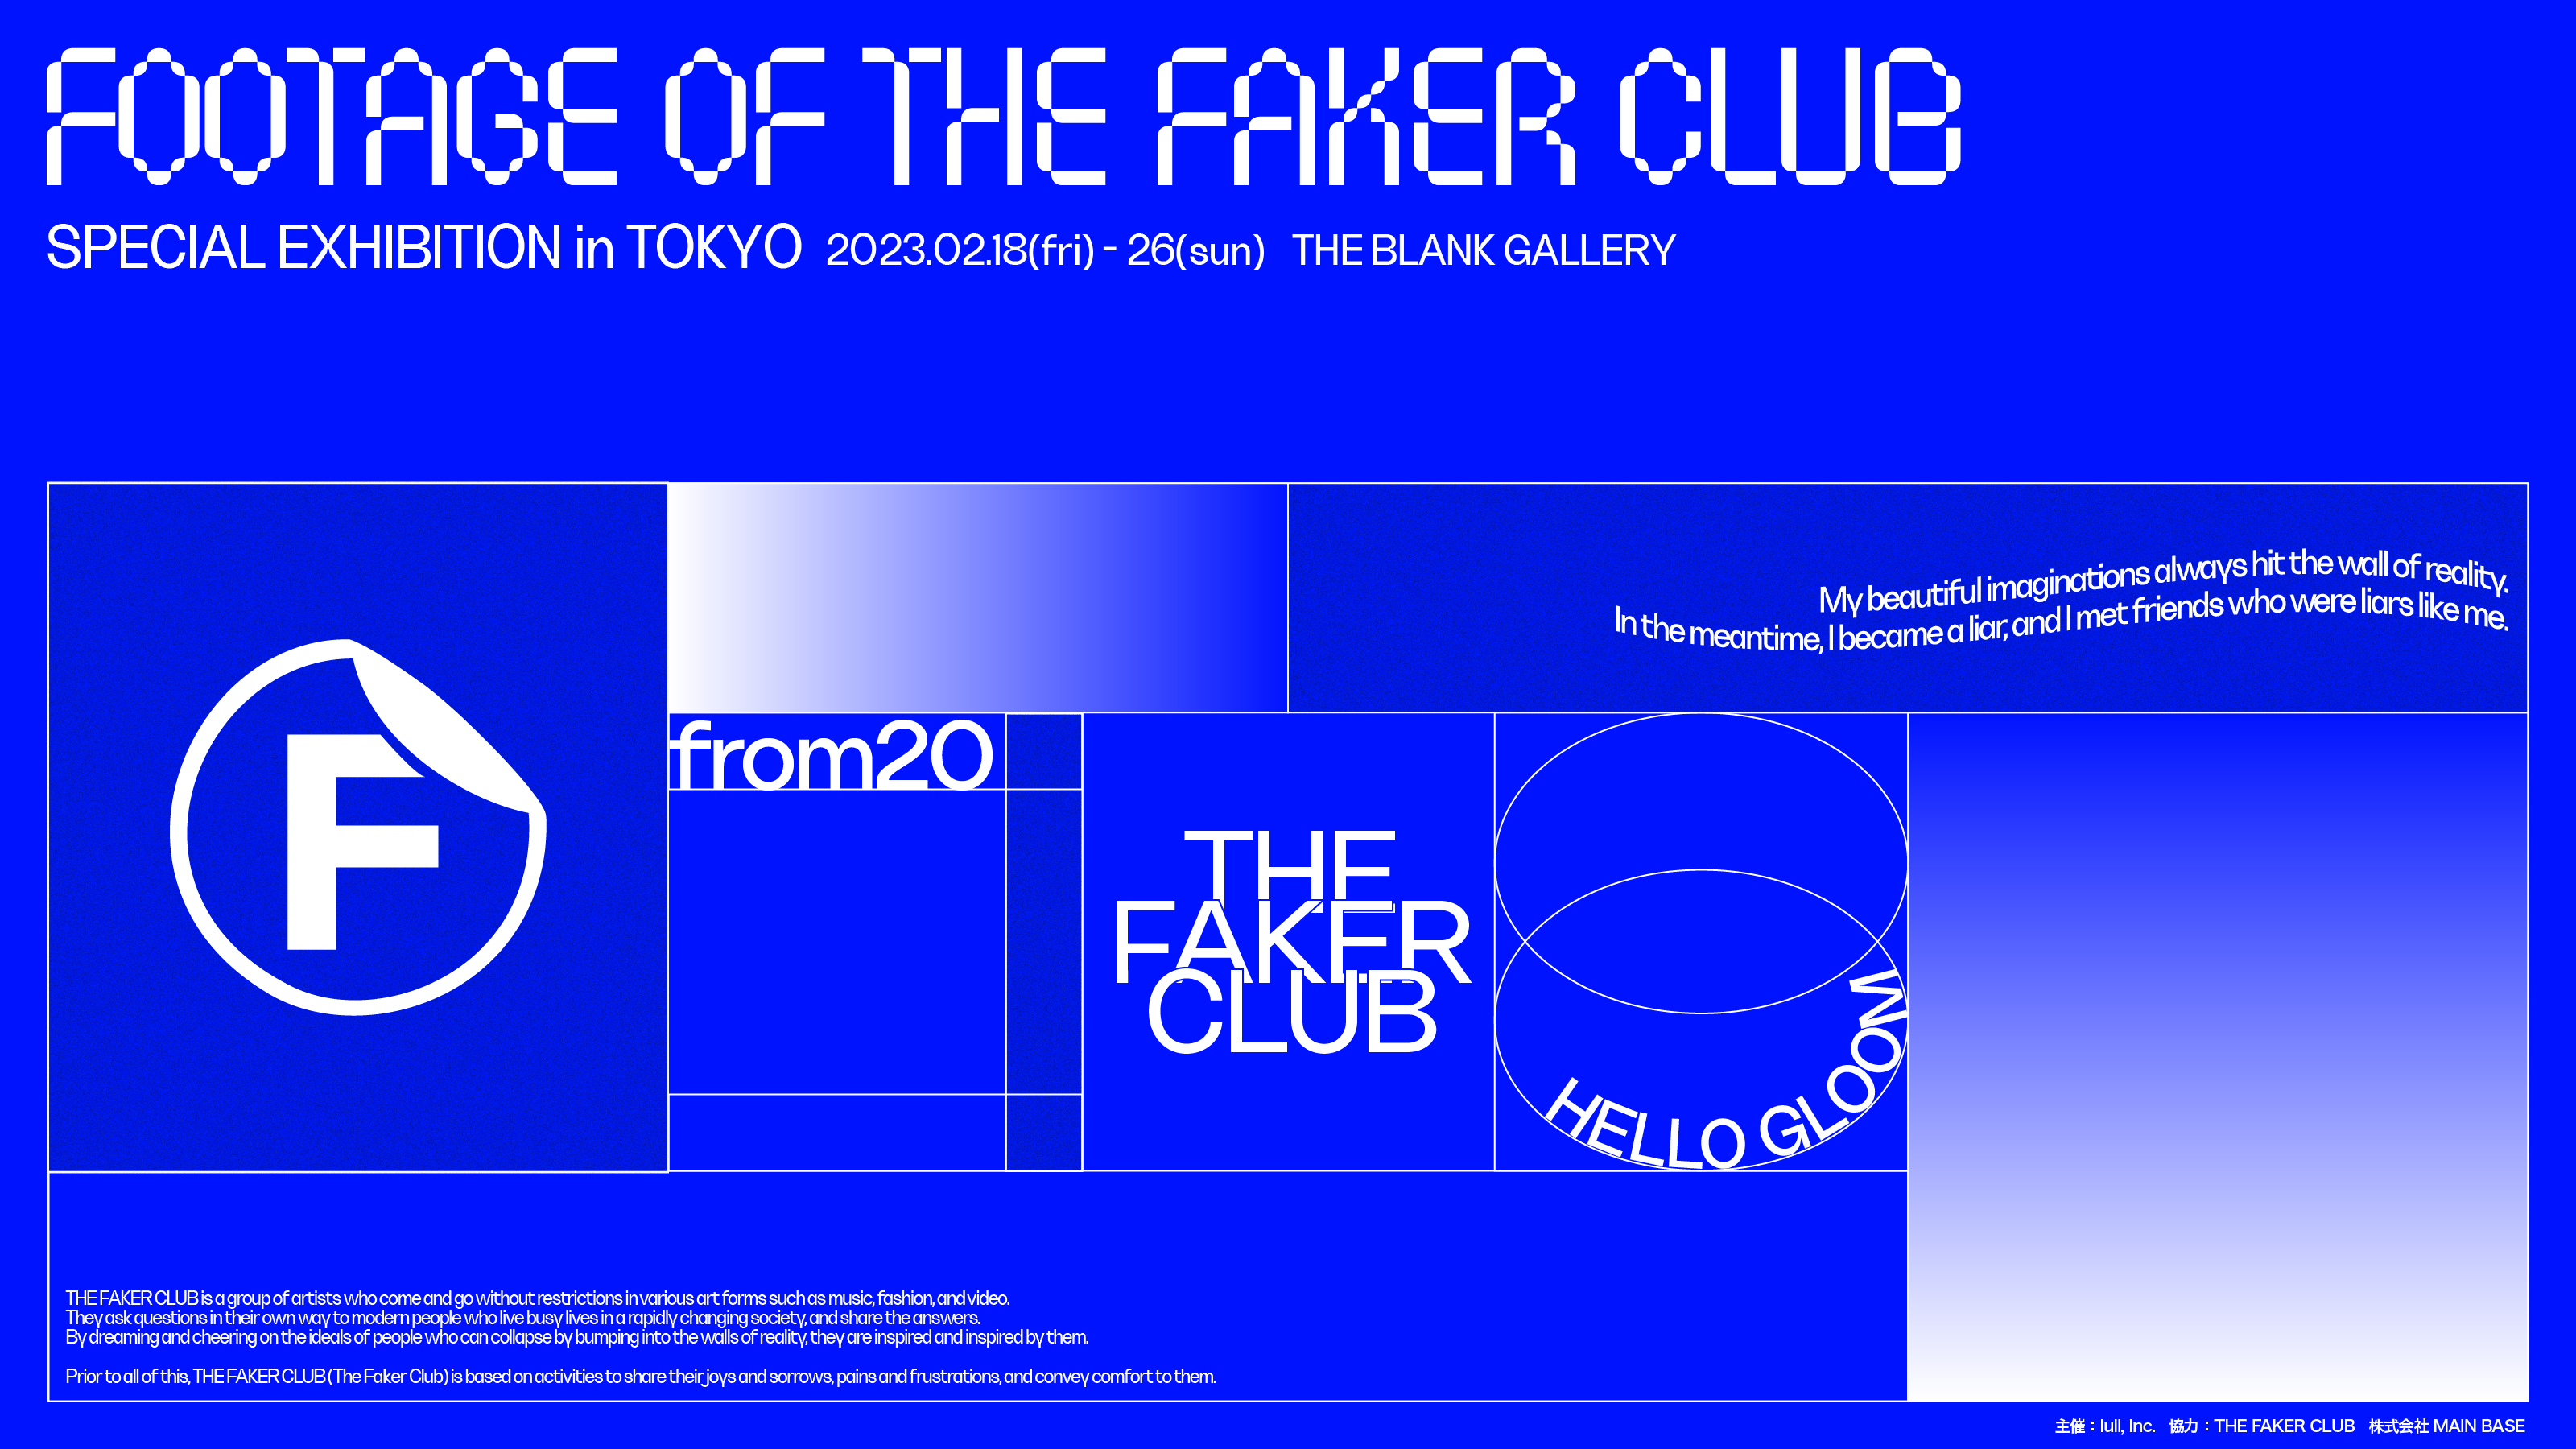 THE FAKER CLUB チェキ　3枚　HELLOGLOOM from20